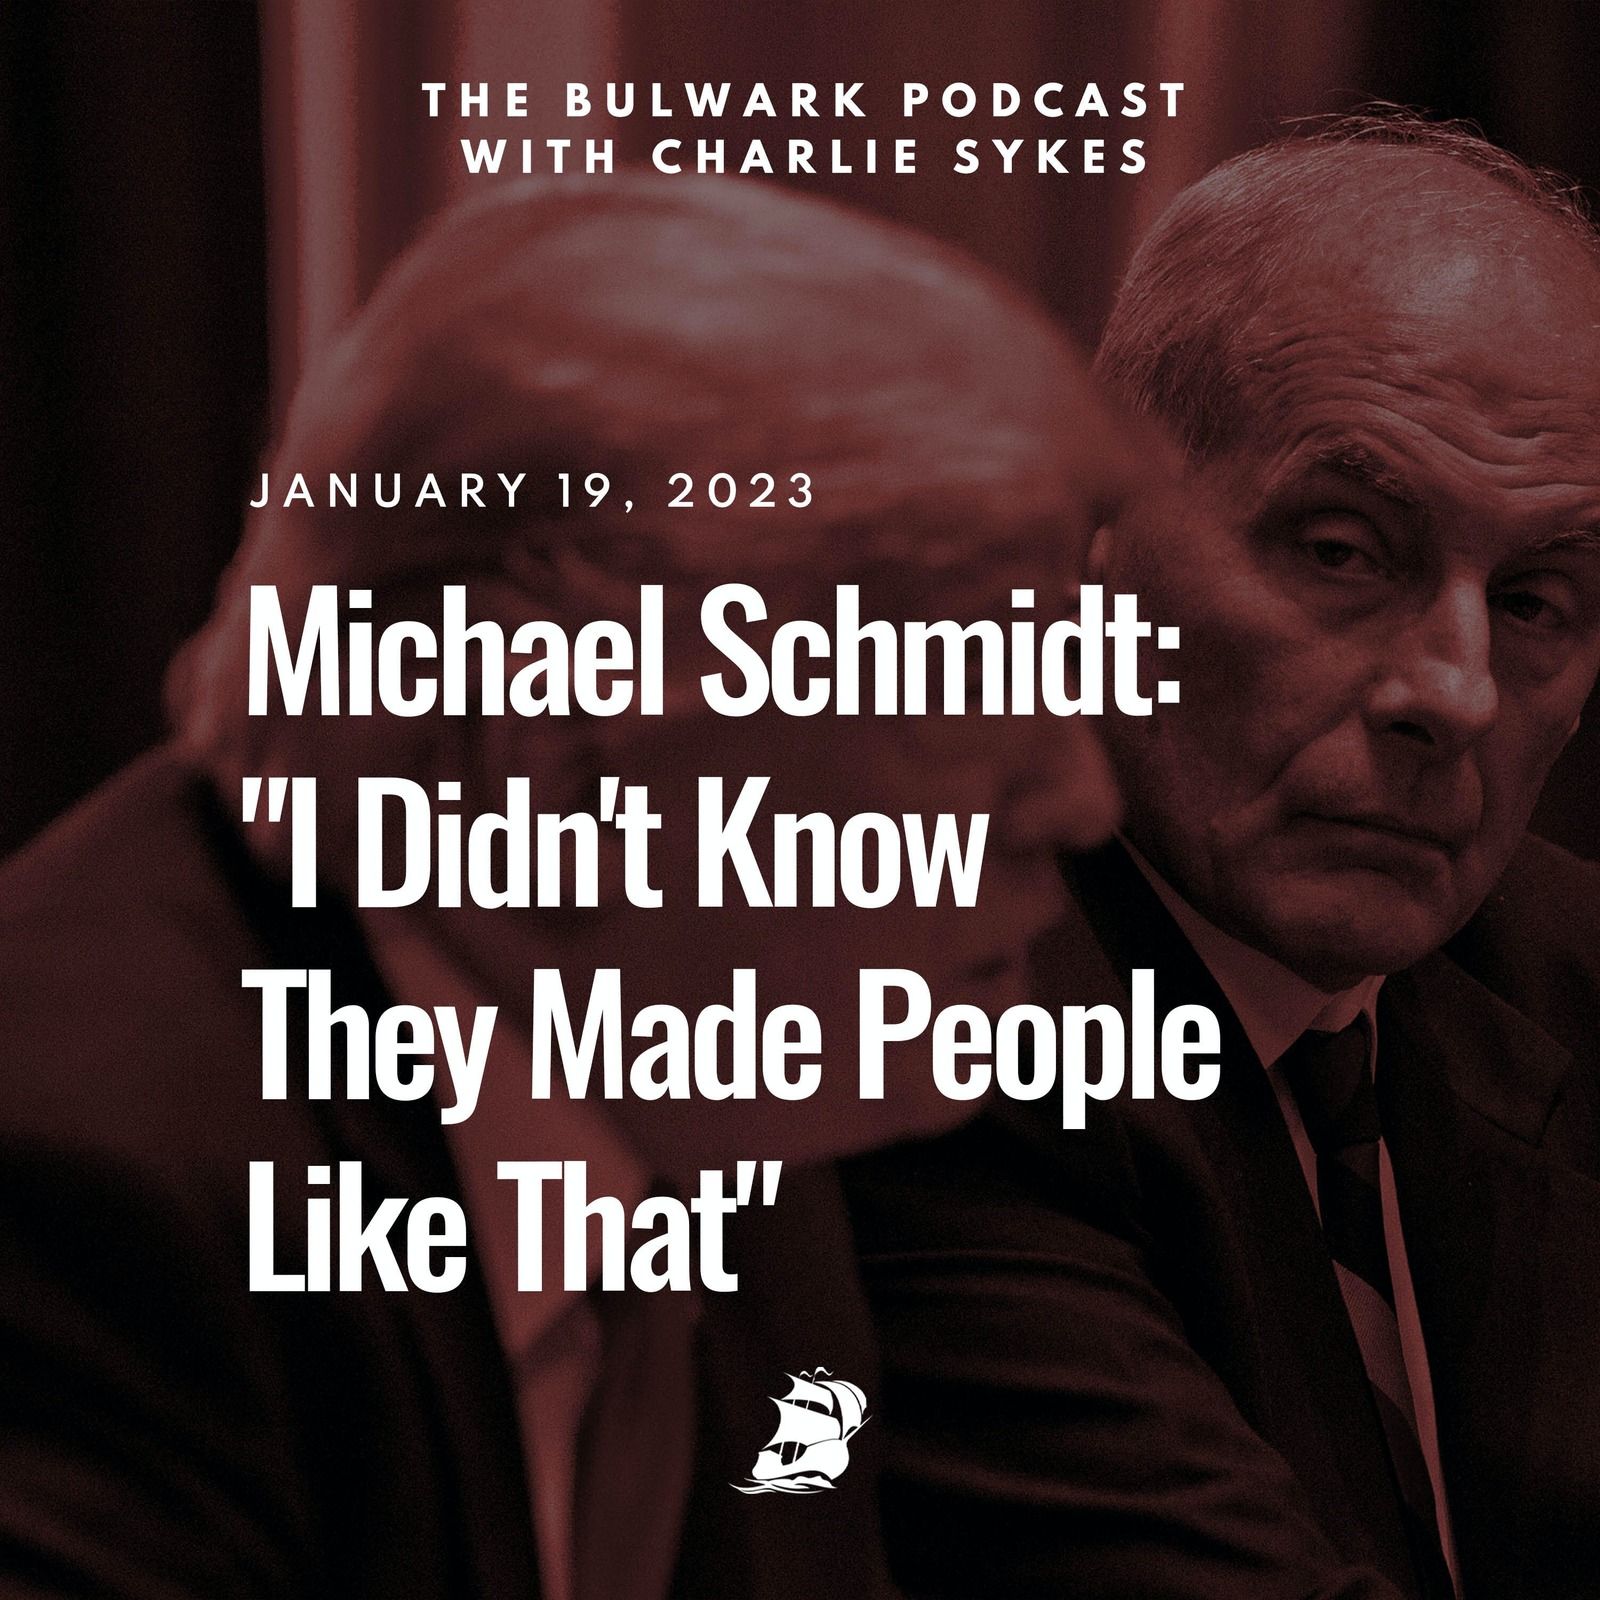 Michael Schmidt: "I Didn't Know They Made People Like That"